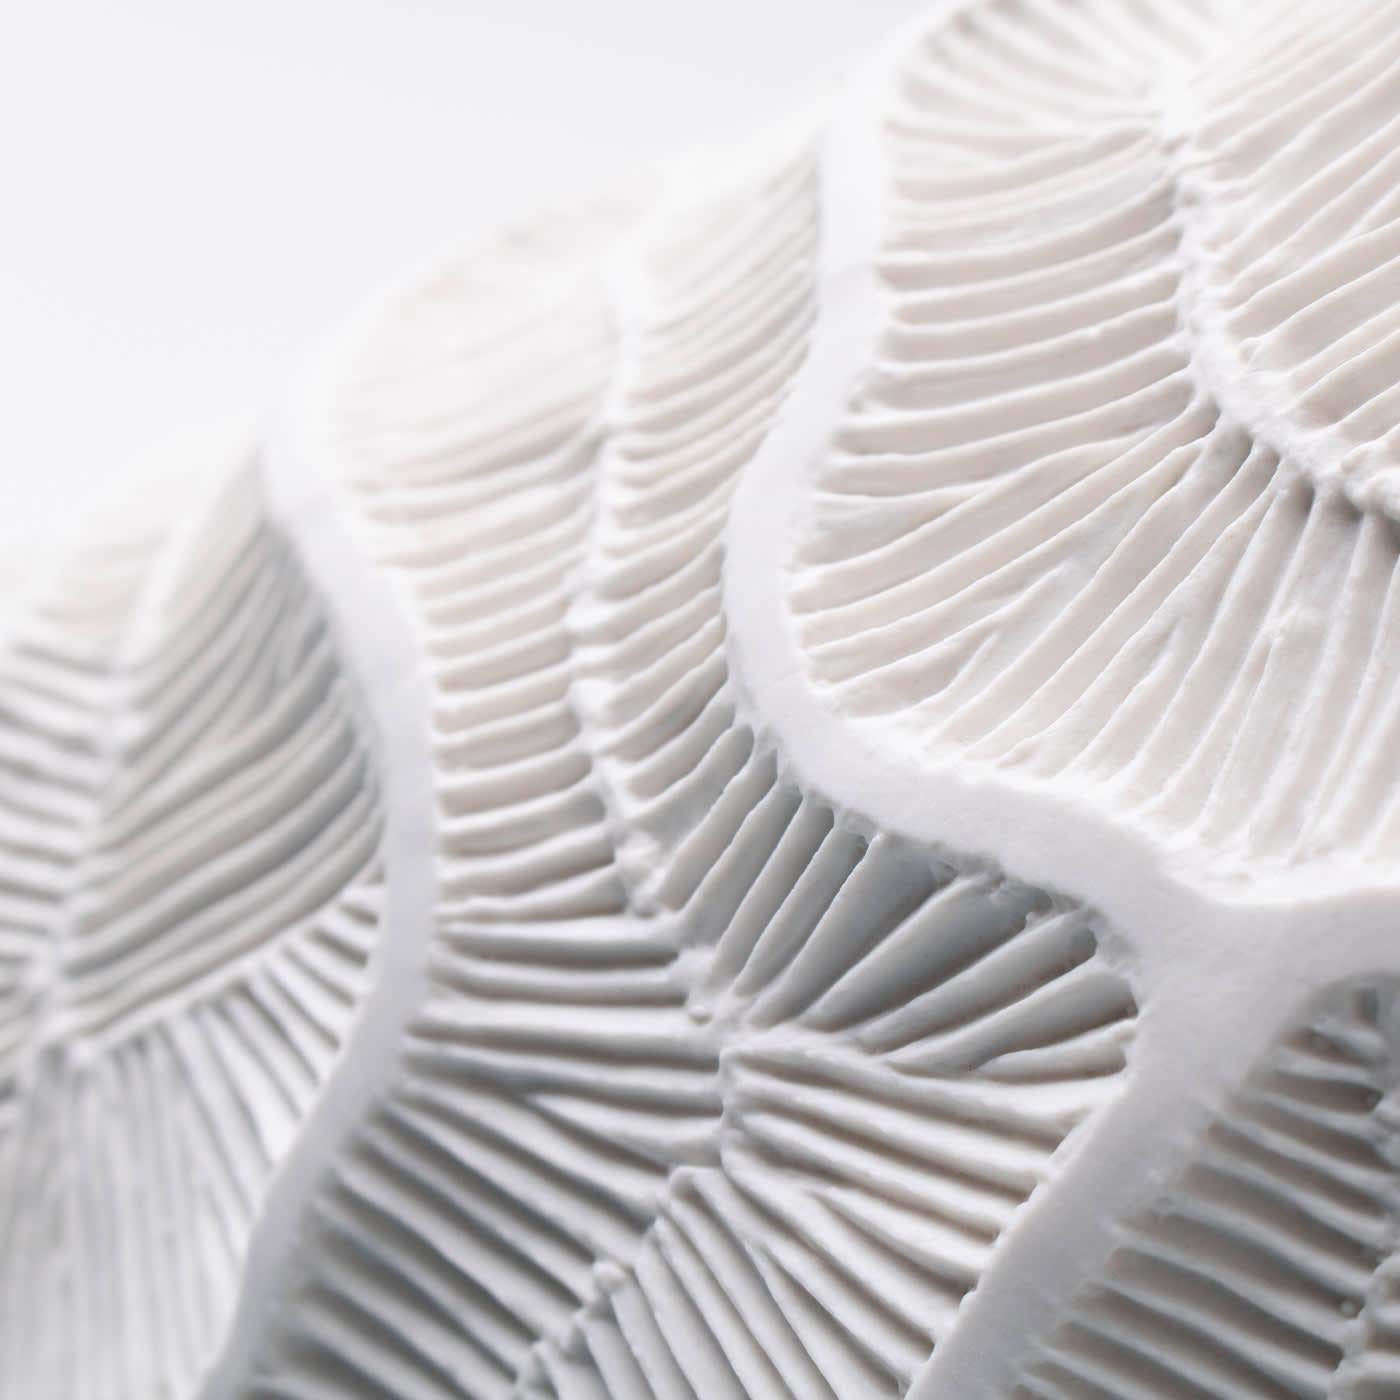 A dense and intricate texture, referring to fossils of madrepores, acts as a skeleton for this vase of Fossilia collection. Featuring beautiful composition, the perfection of shape, and accuracy in the details of the unglazed porcelain, this